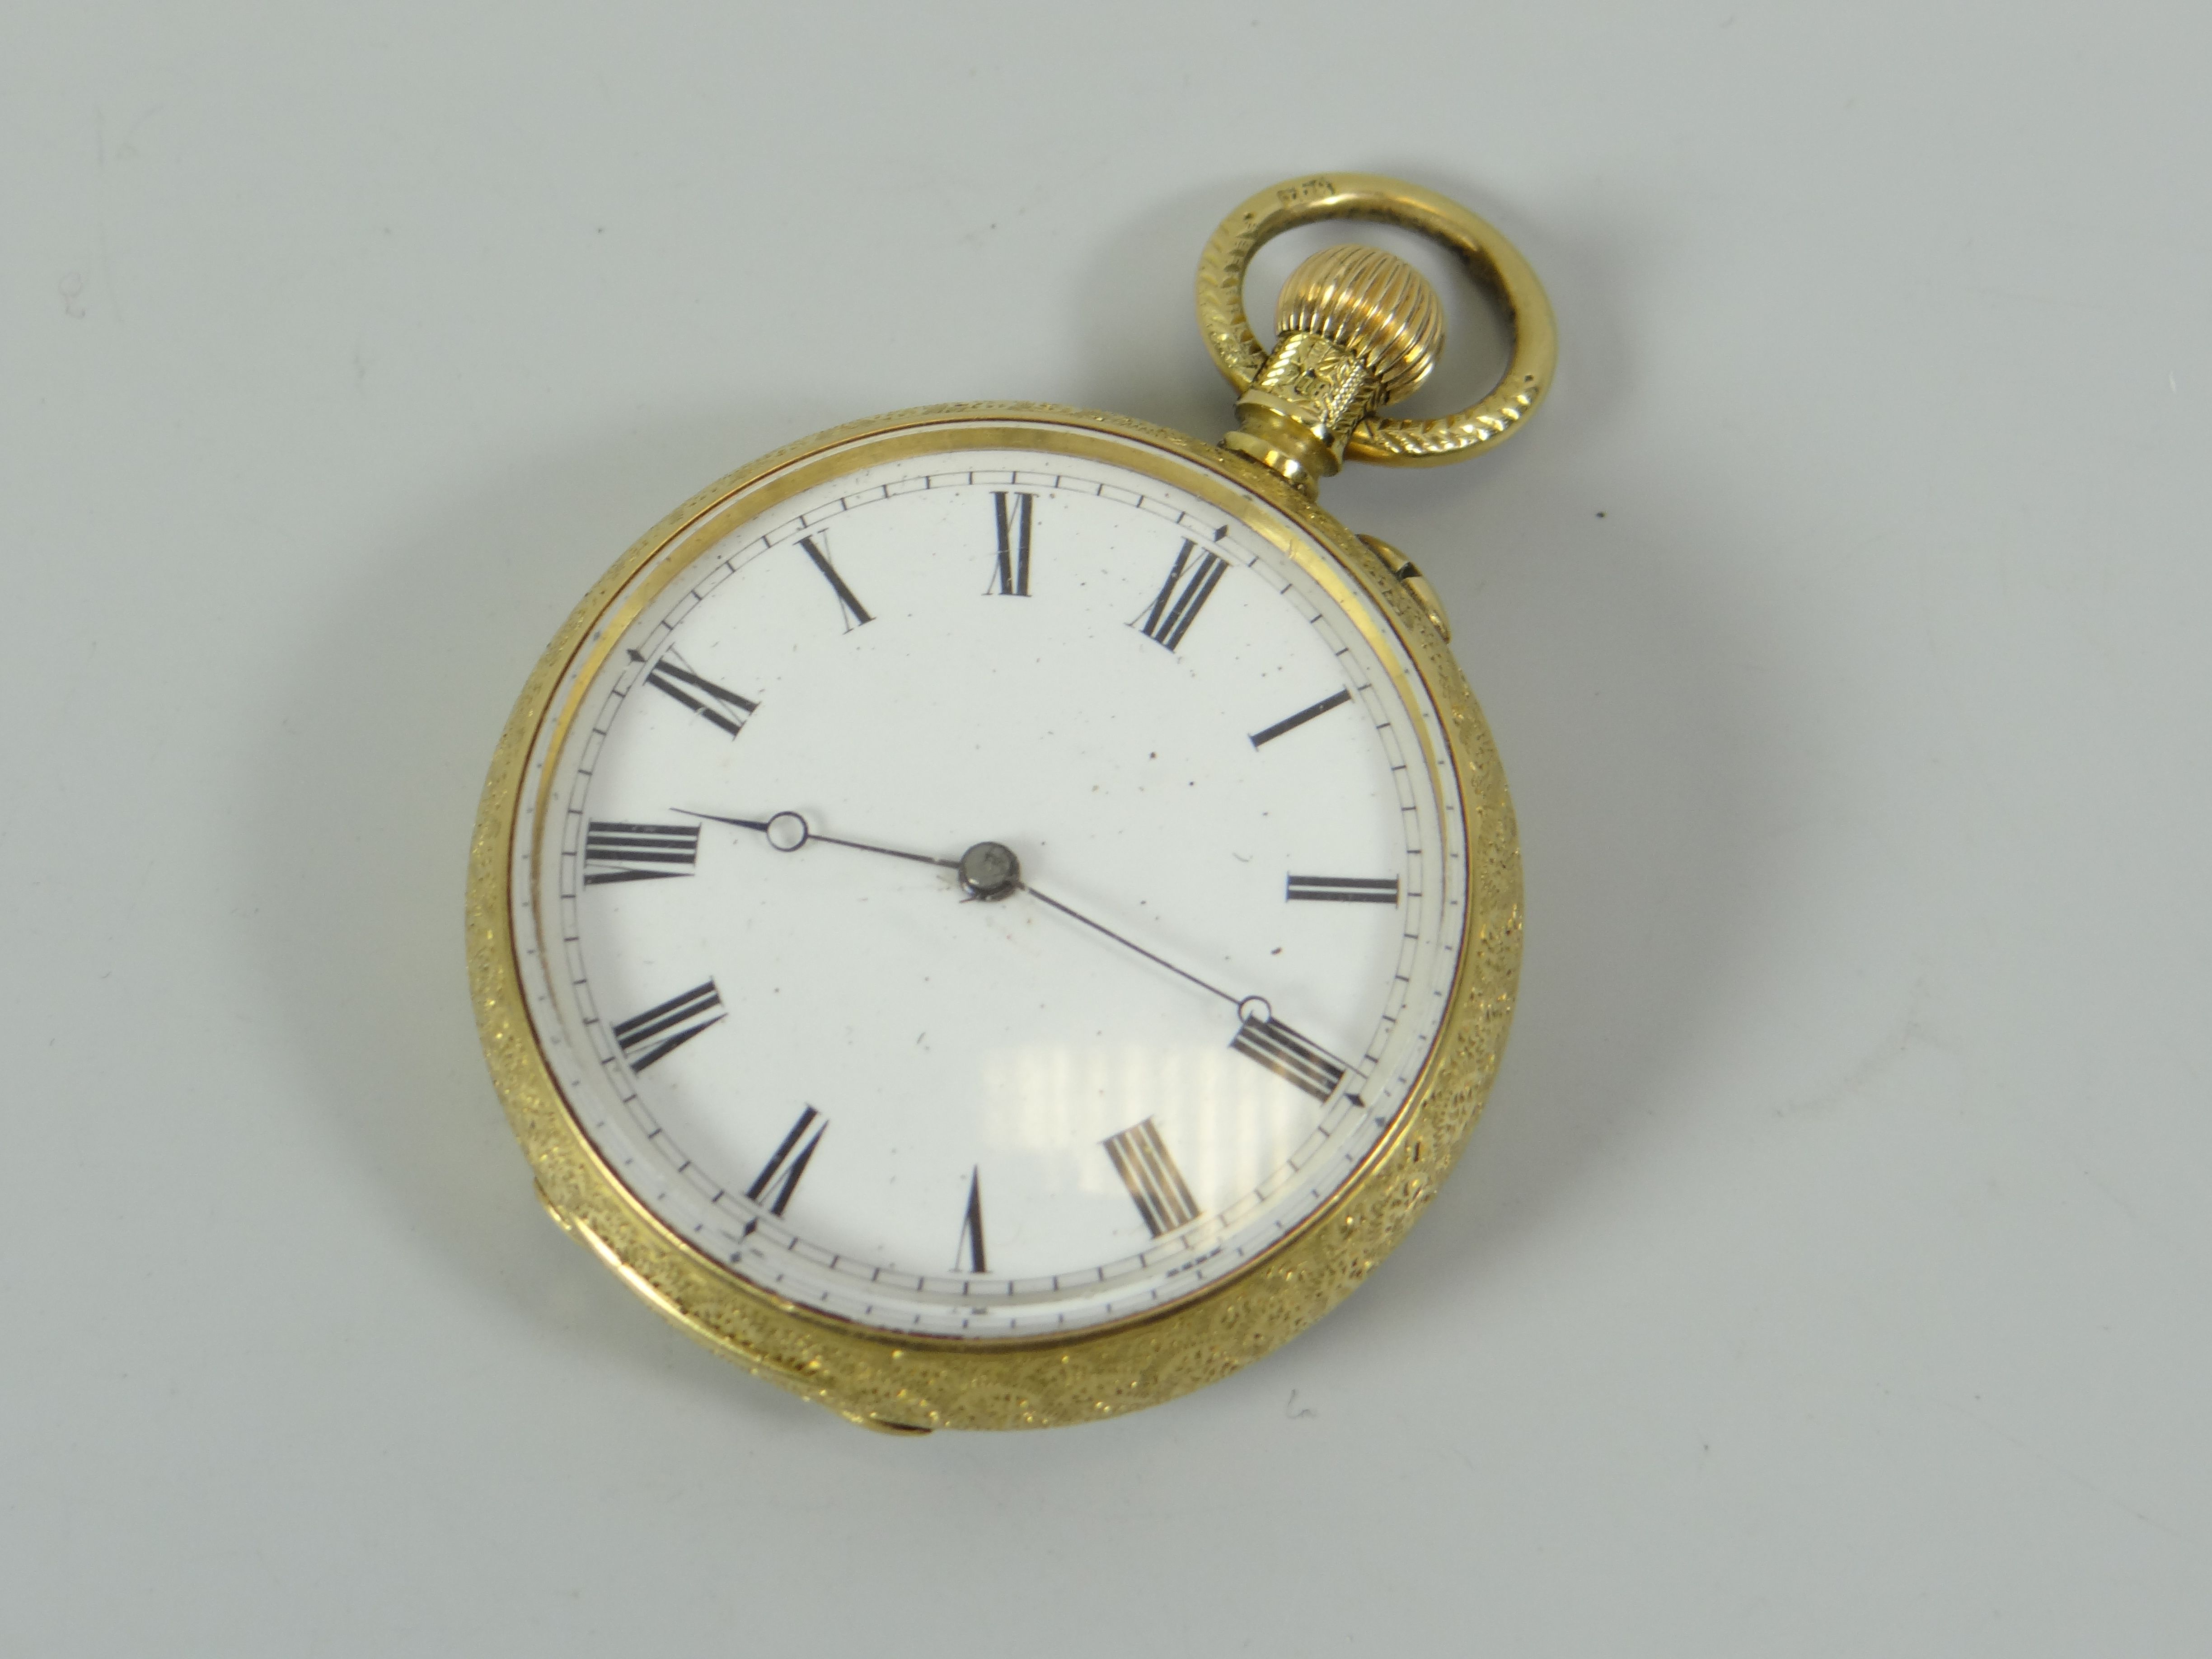 AN 18CT GOLD OPEN-FACE POCKET WATCH BY JULES JURGENSEN stem-wound and having a finely chased outer-